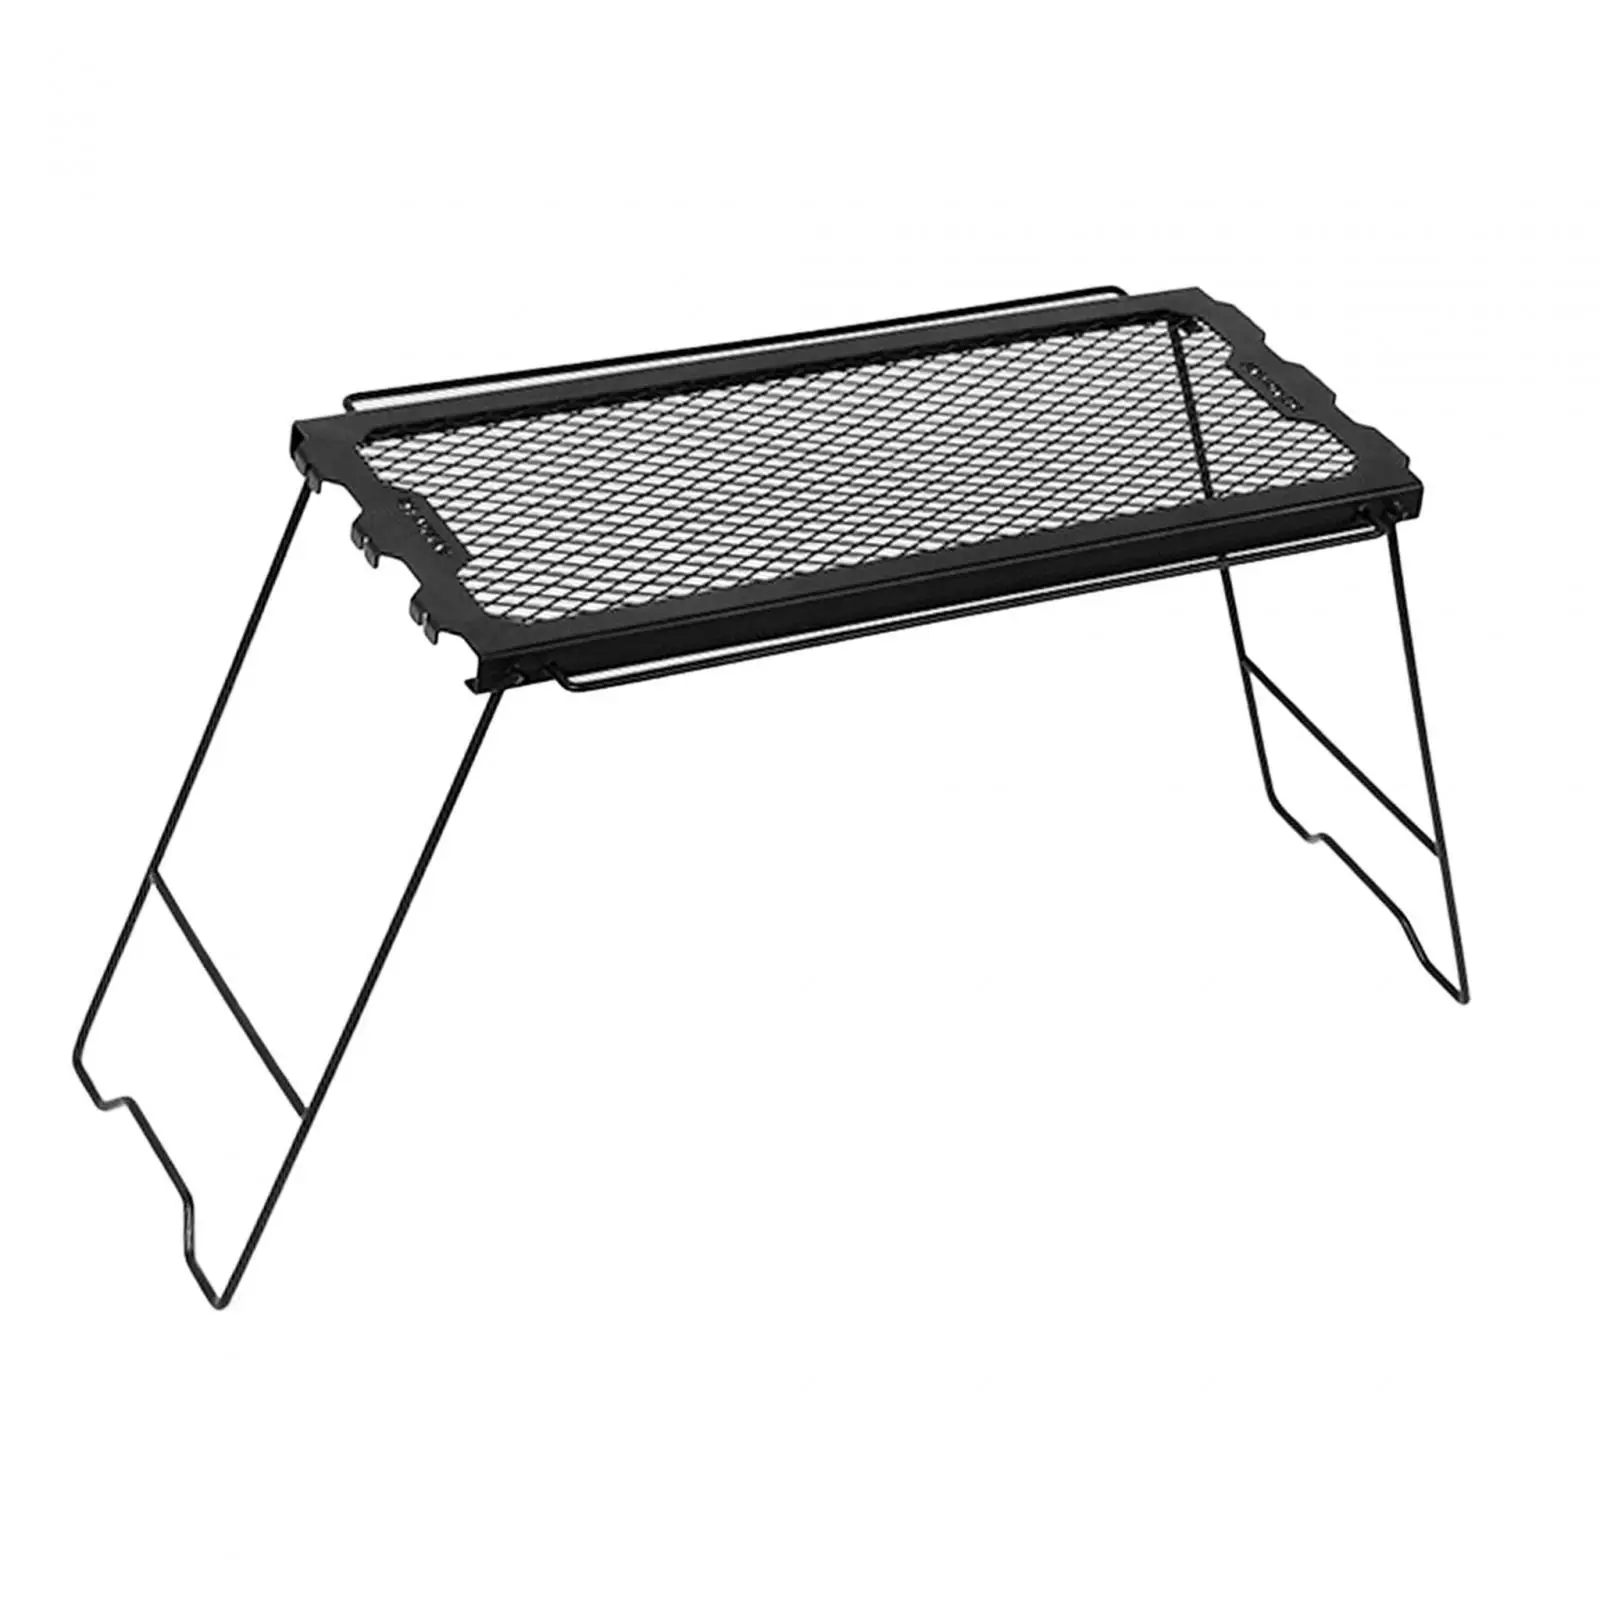 Folding Camping Table Picnic Foldable Campfire Grill for Beach Hiking Garden